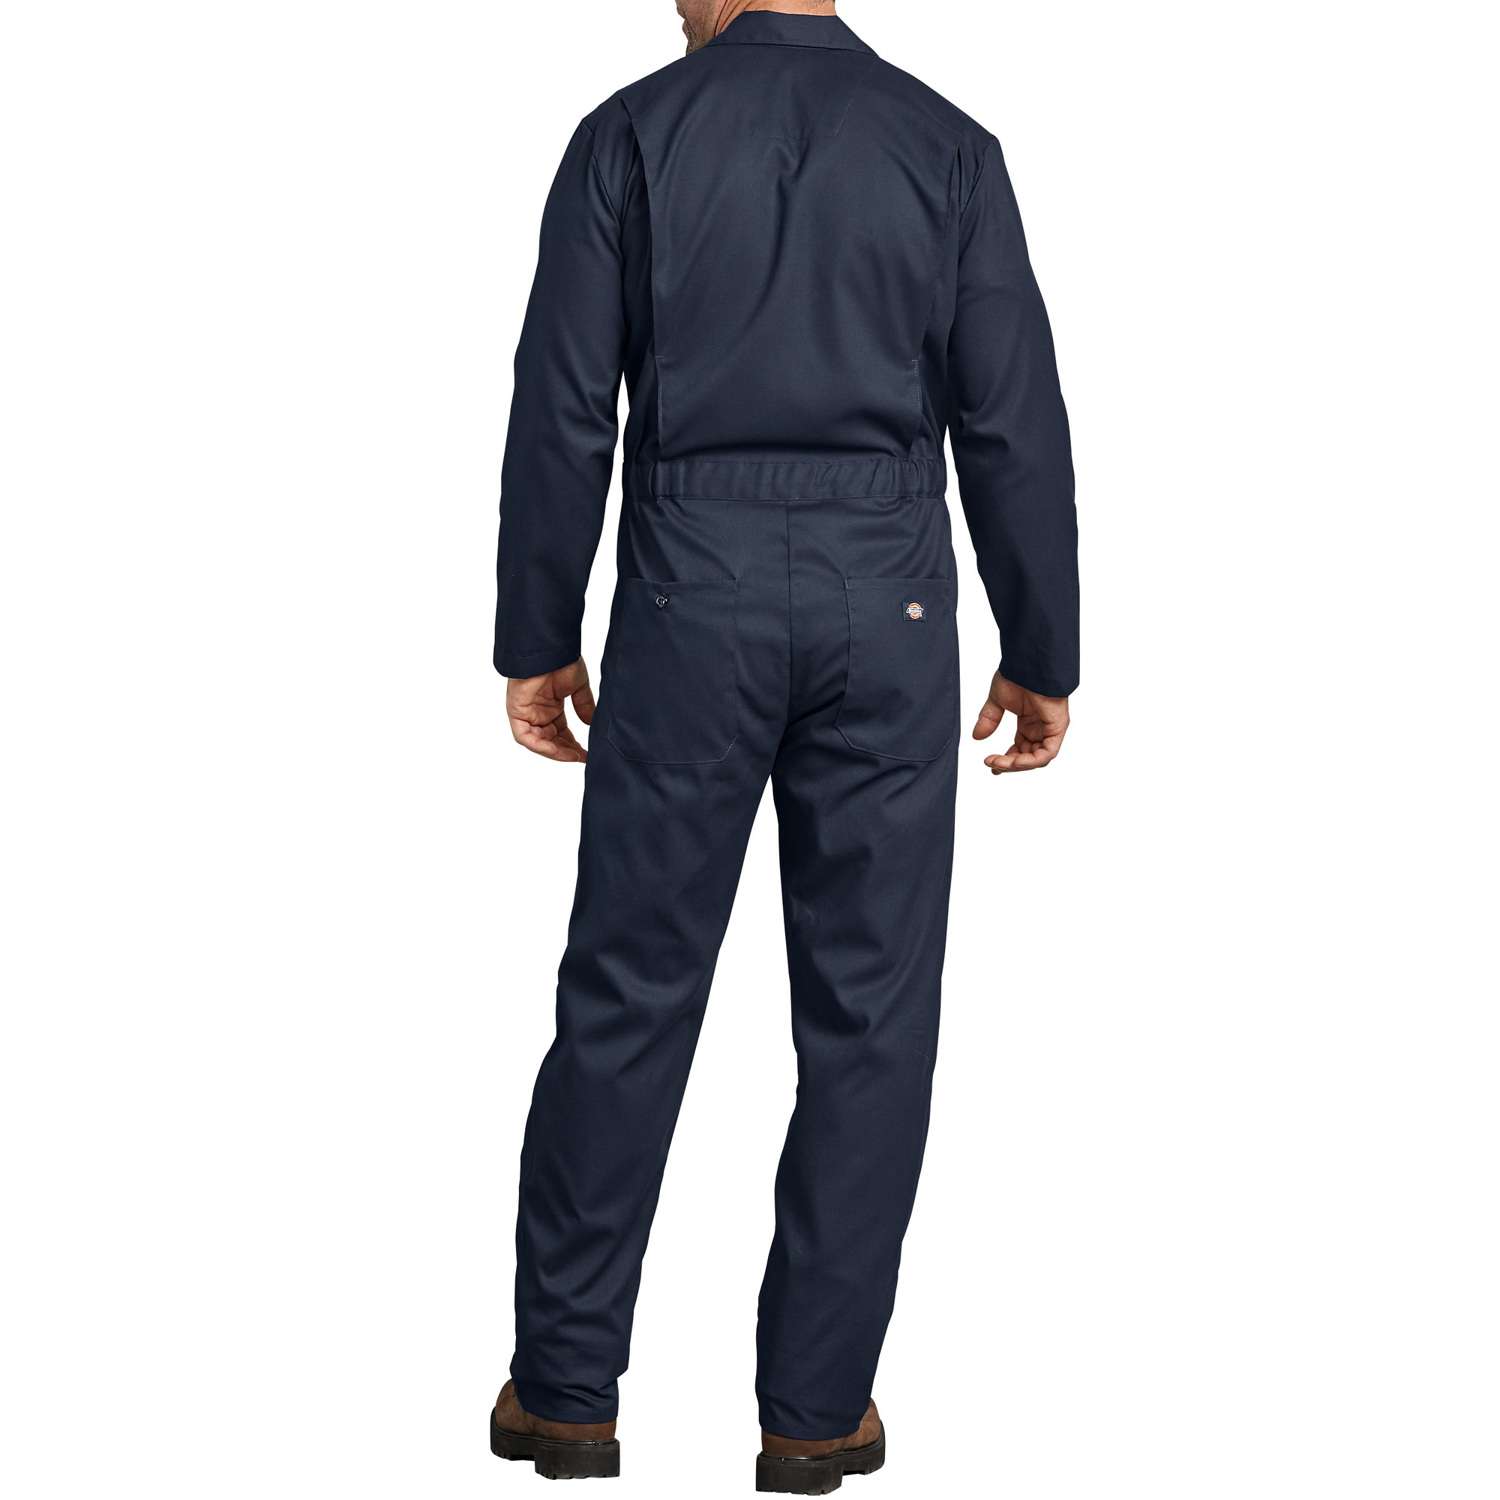 Dickies Men's Cotton/Polyester Coveralls Navy XL pk Ace Hardware